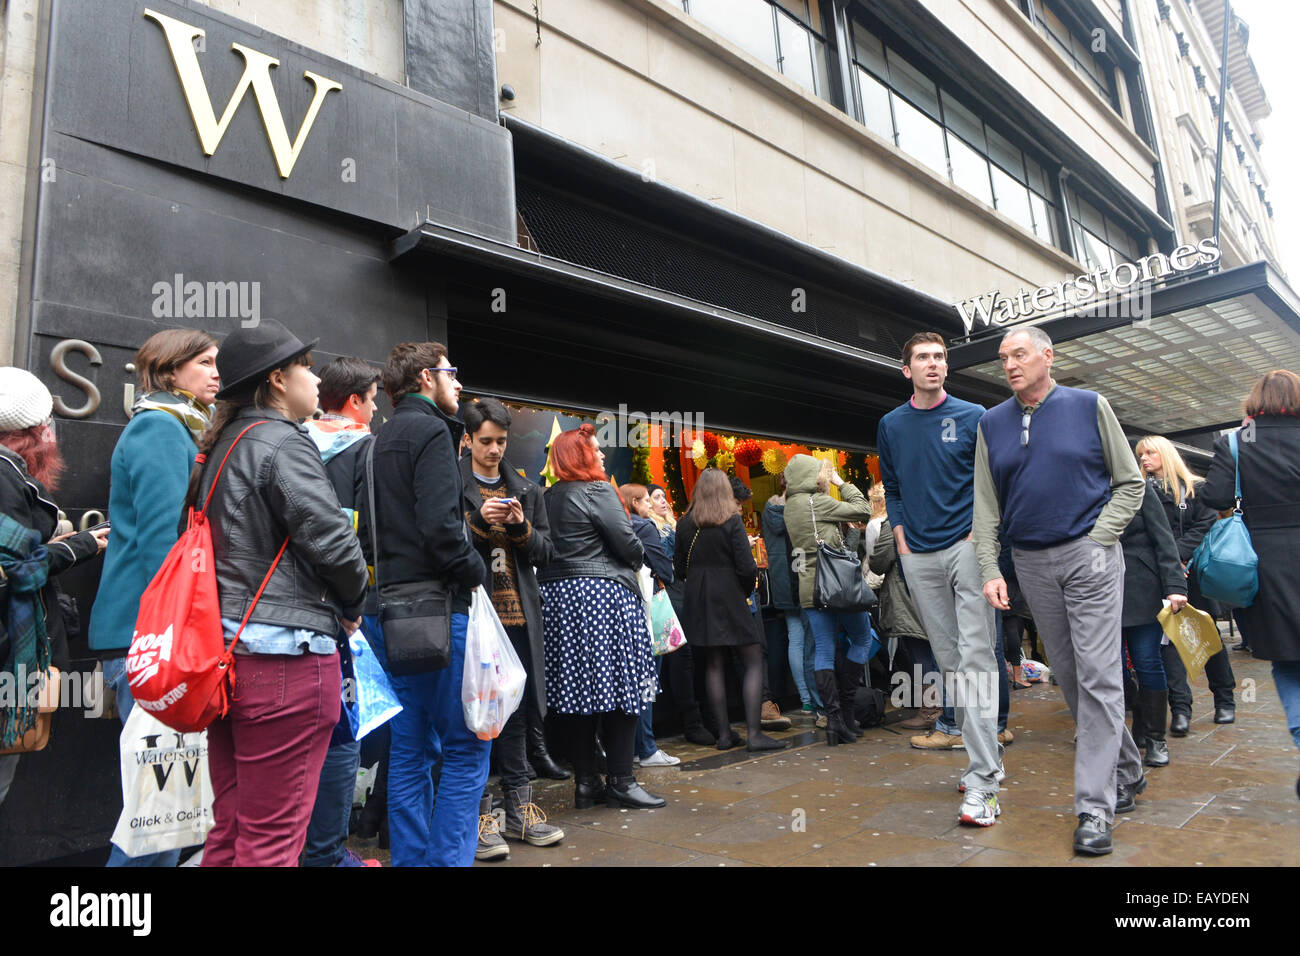 Piccadilly, London, UK. 22nd November 2014. A large queue outside Waterstones Bookshop on Piccadilly for the book signing by actor and author, James Franco. Credit:  Matthew Chattle/Alamy Live News Stock Photo